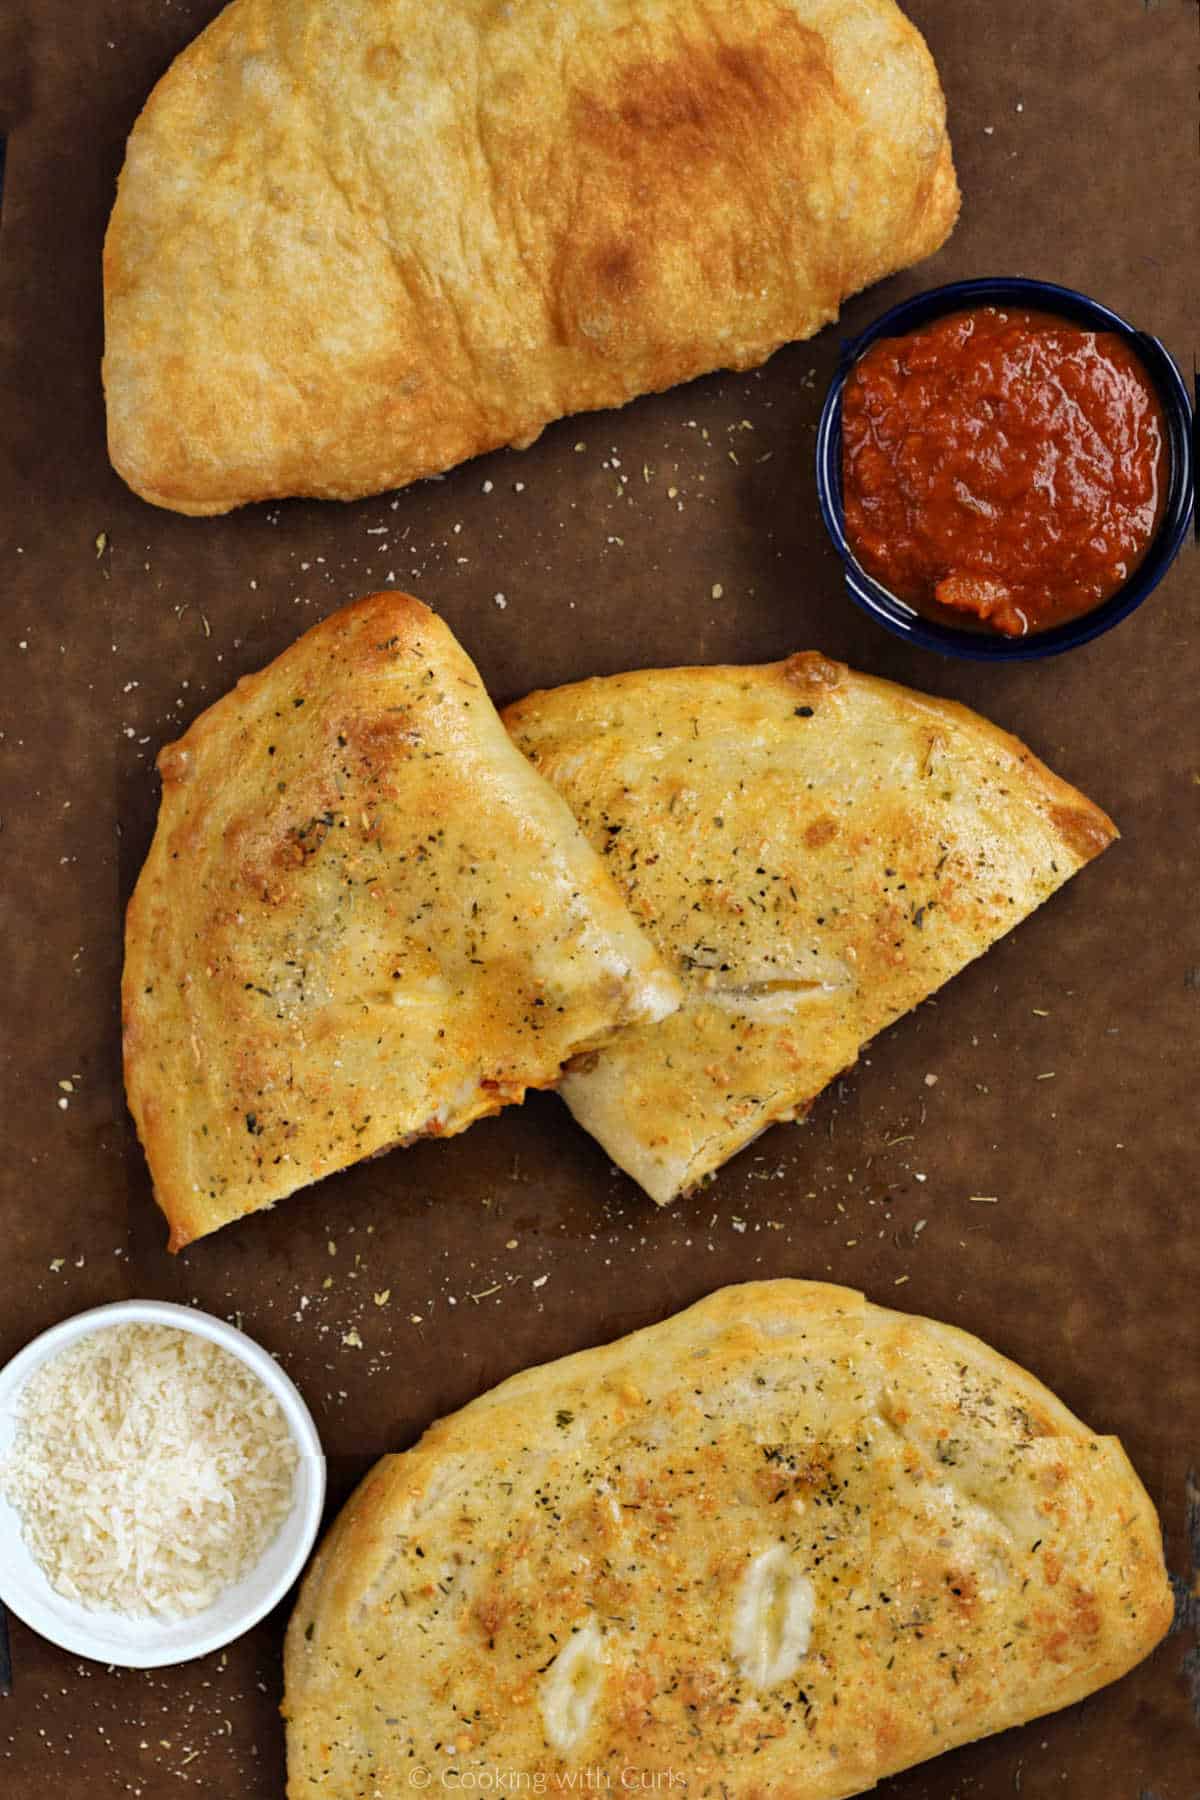 Two whole calzones and one cut in half on a board with pizza sauce in bowl.